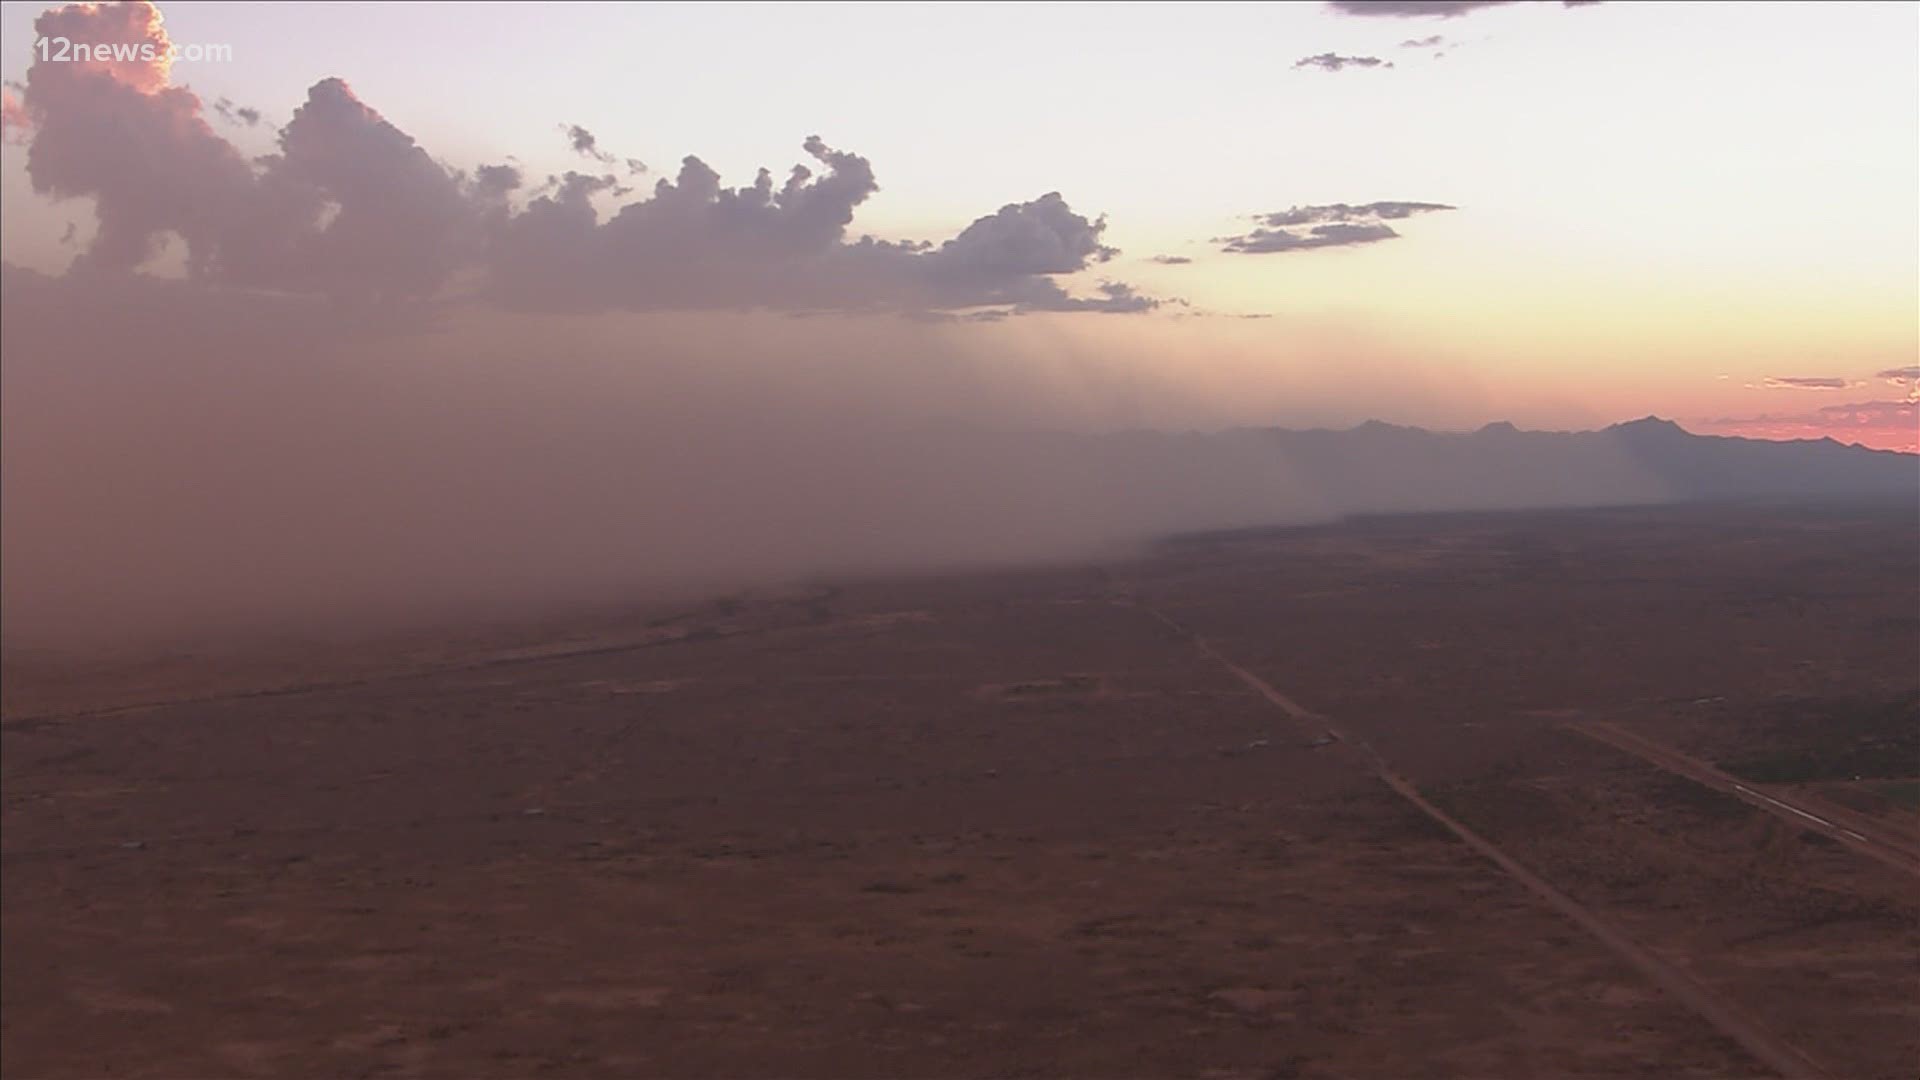 The National Weather Service in Phoenix issued a now-expired dust advisory for the southern part of the Valley.